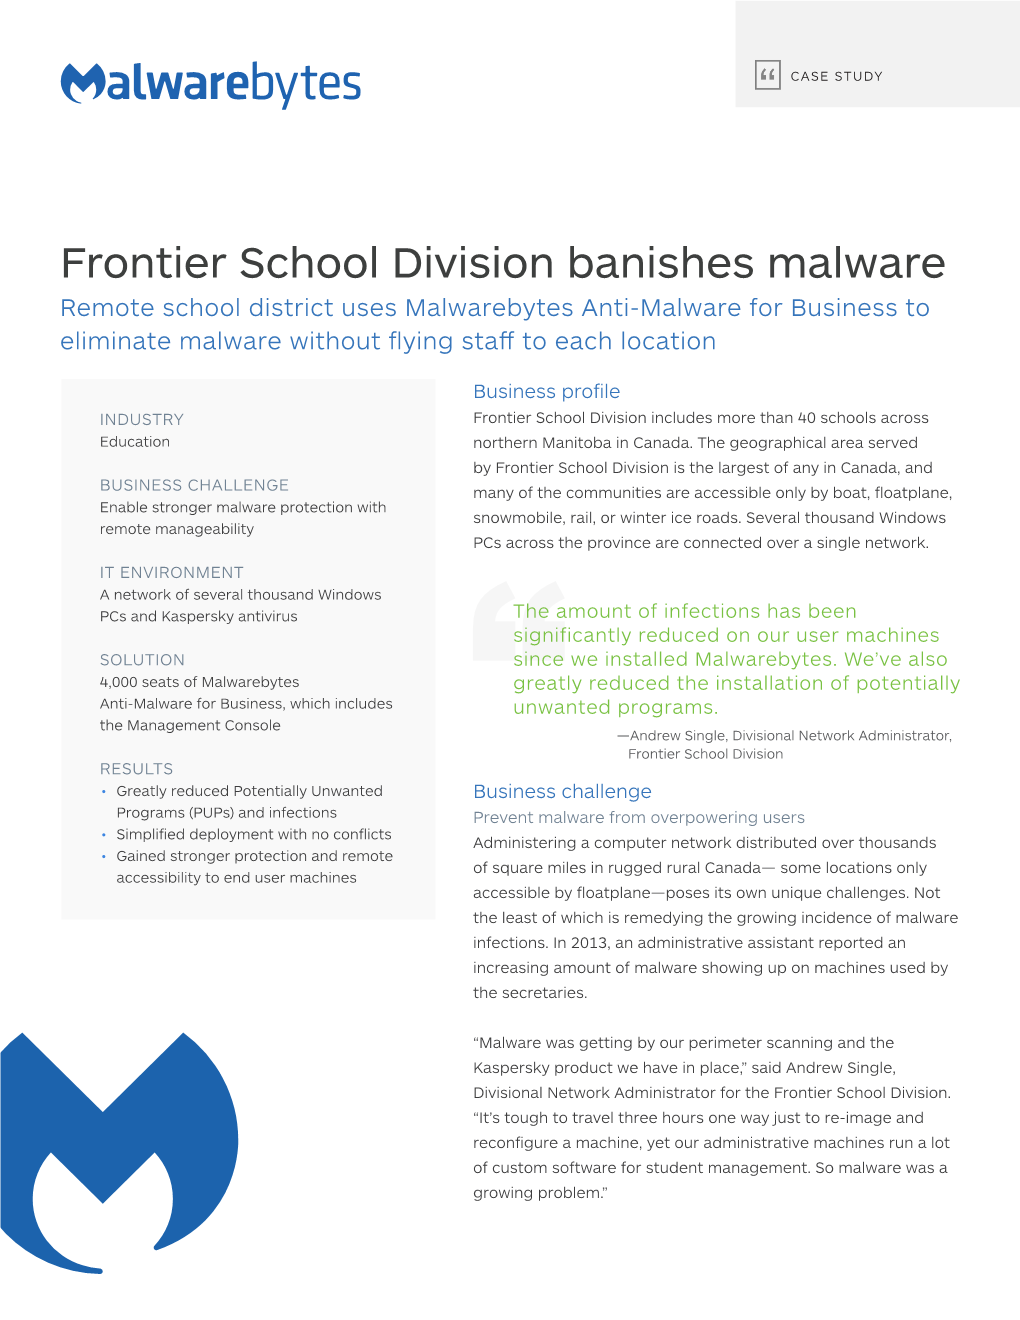 Frontier School Division Banishes Malware